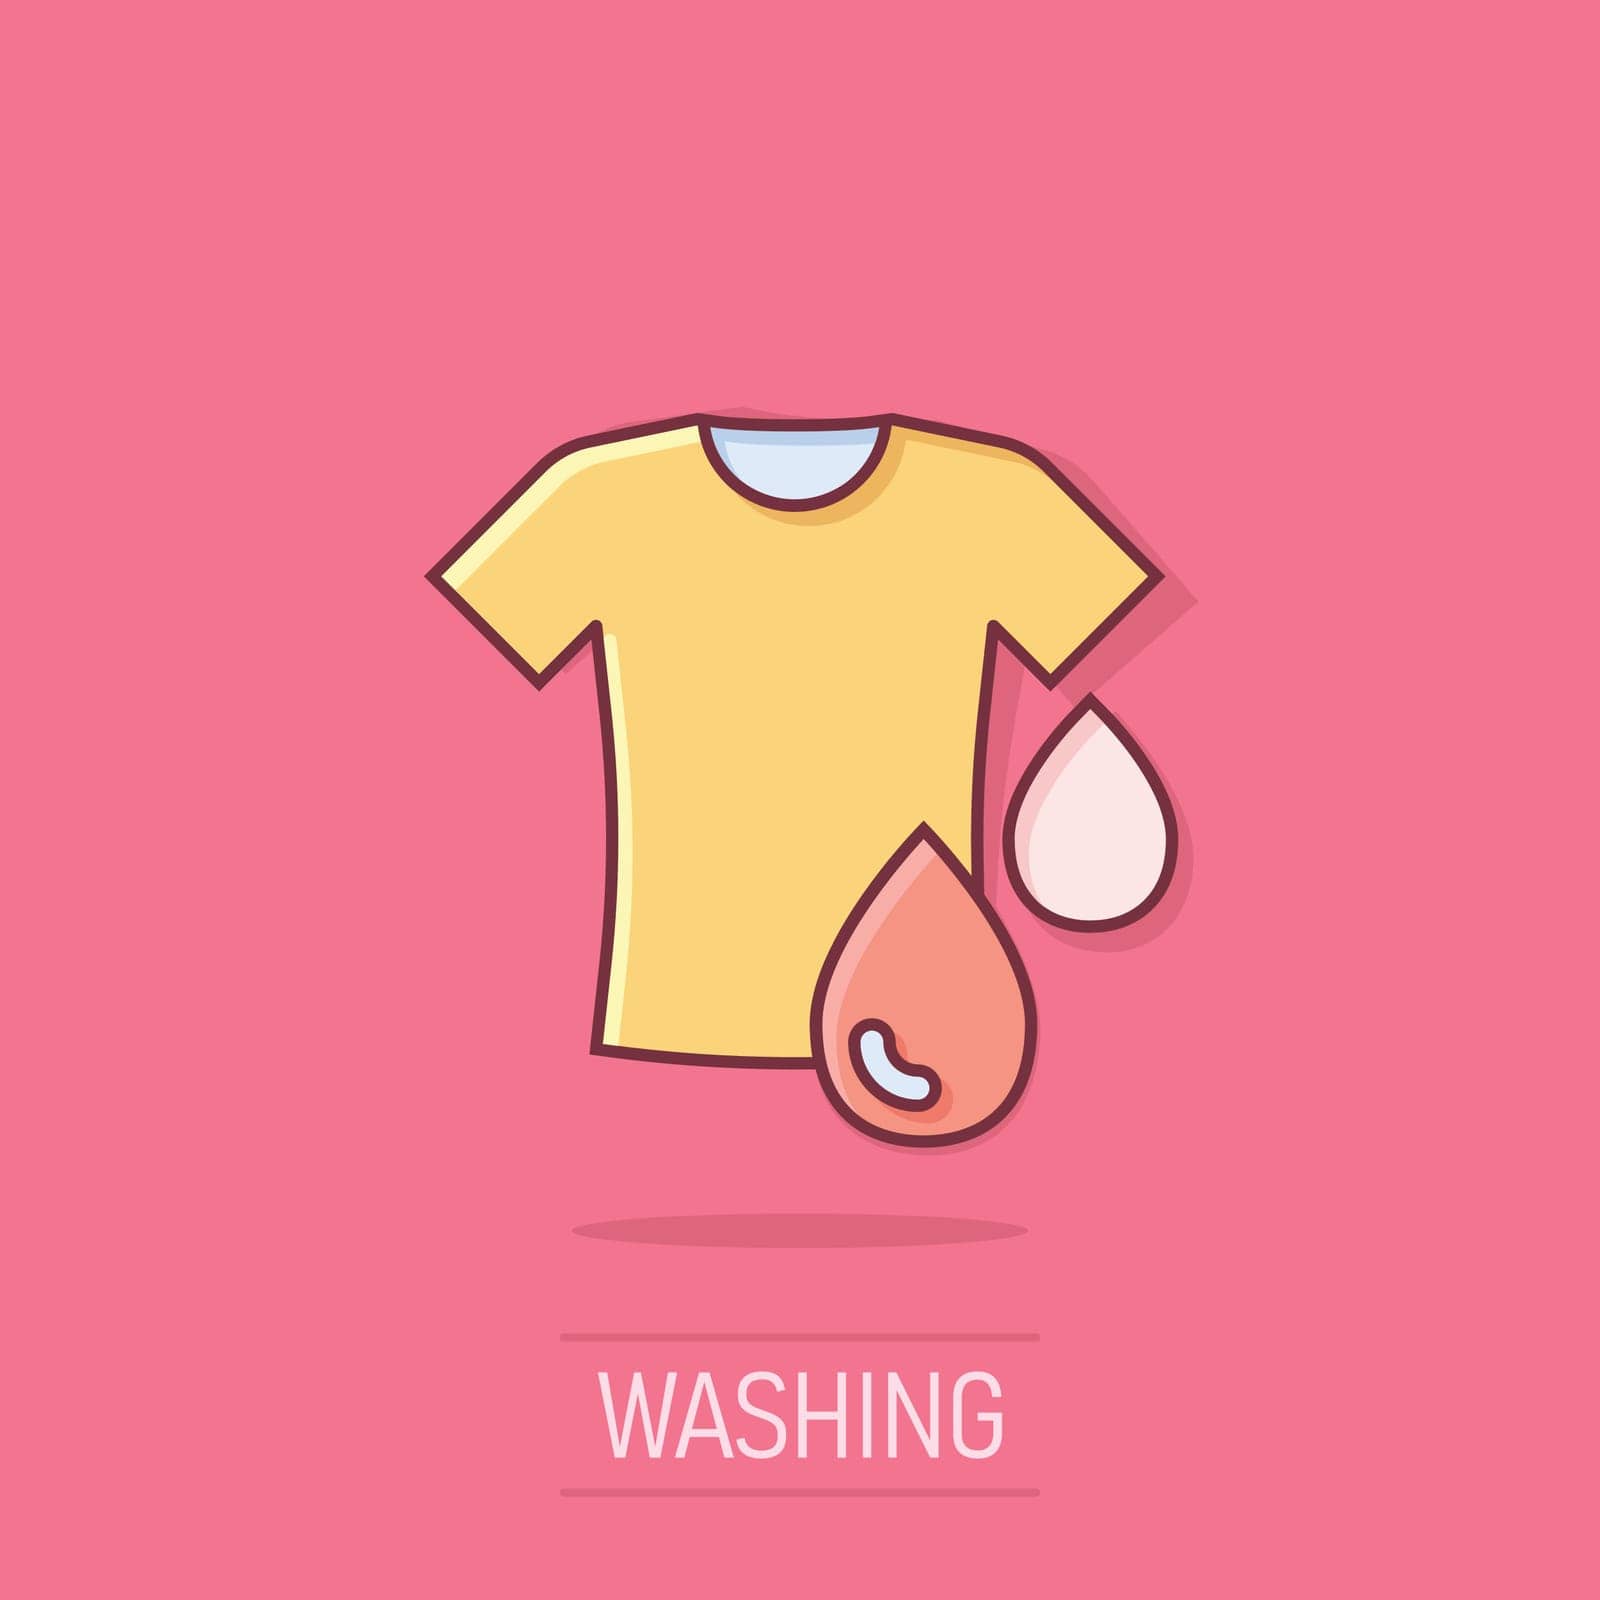 T-shirt washing icon in comic style. Clothes dry cartoon vector illustration on isolated background. Shirt laundry splash effect business concept. by LysenkoA